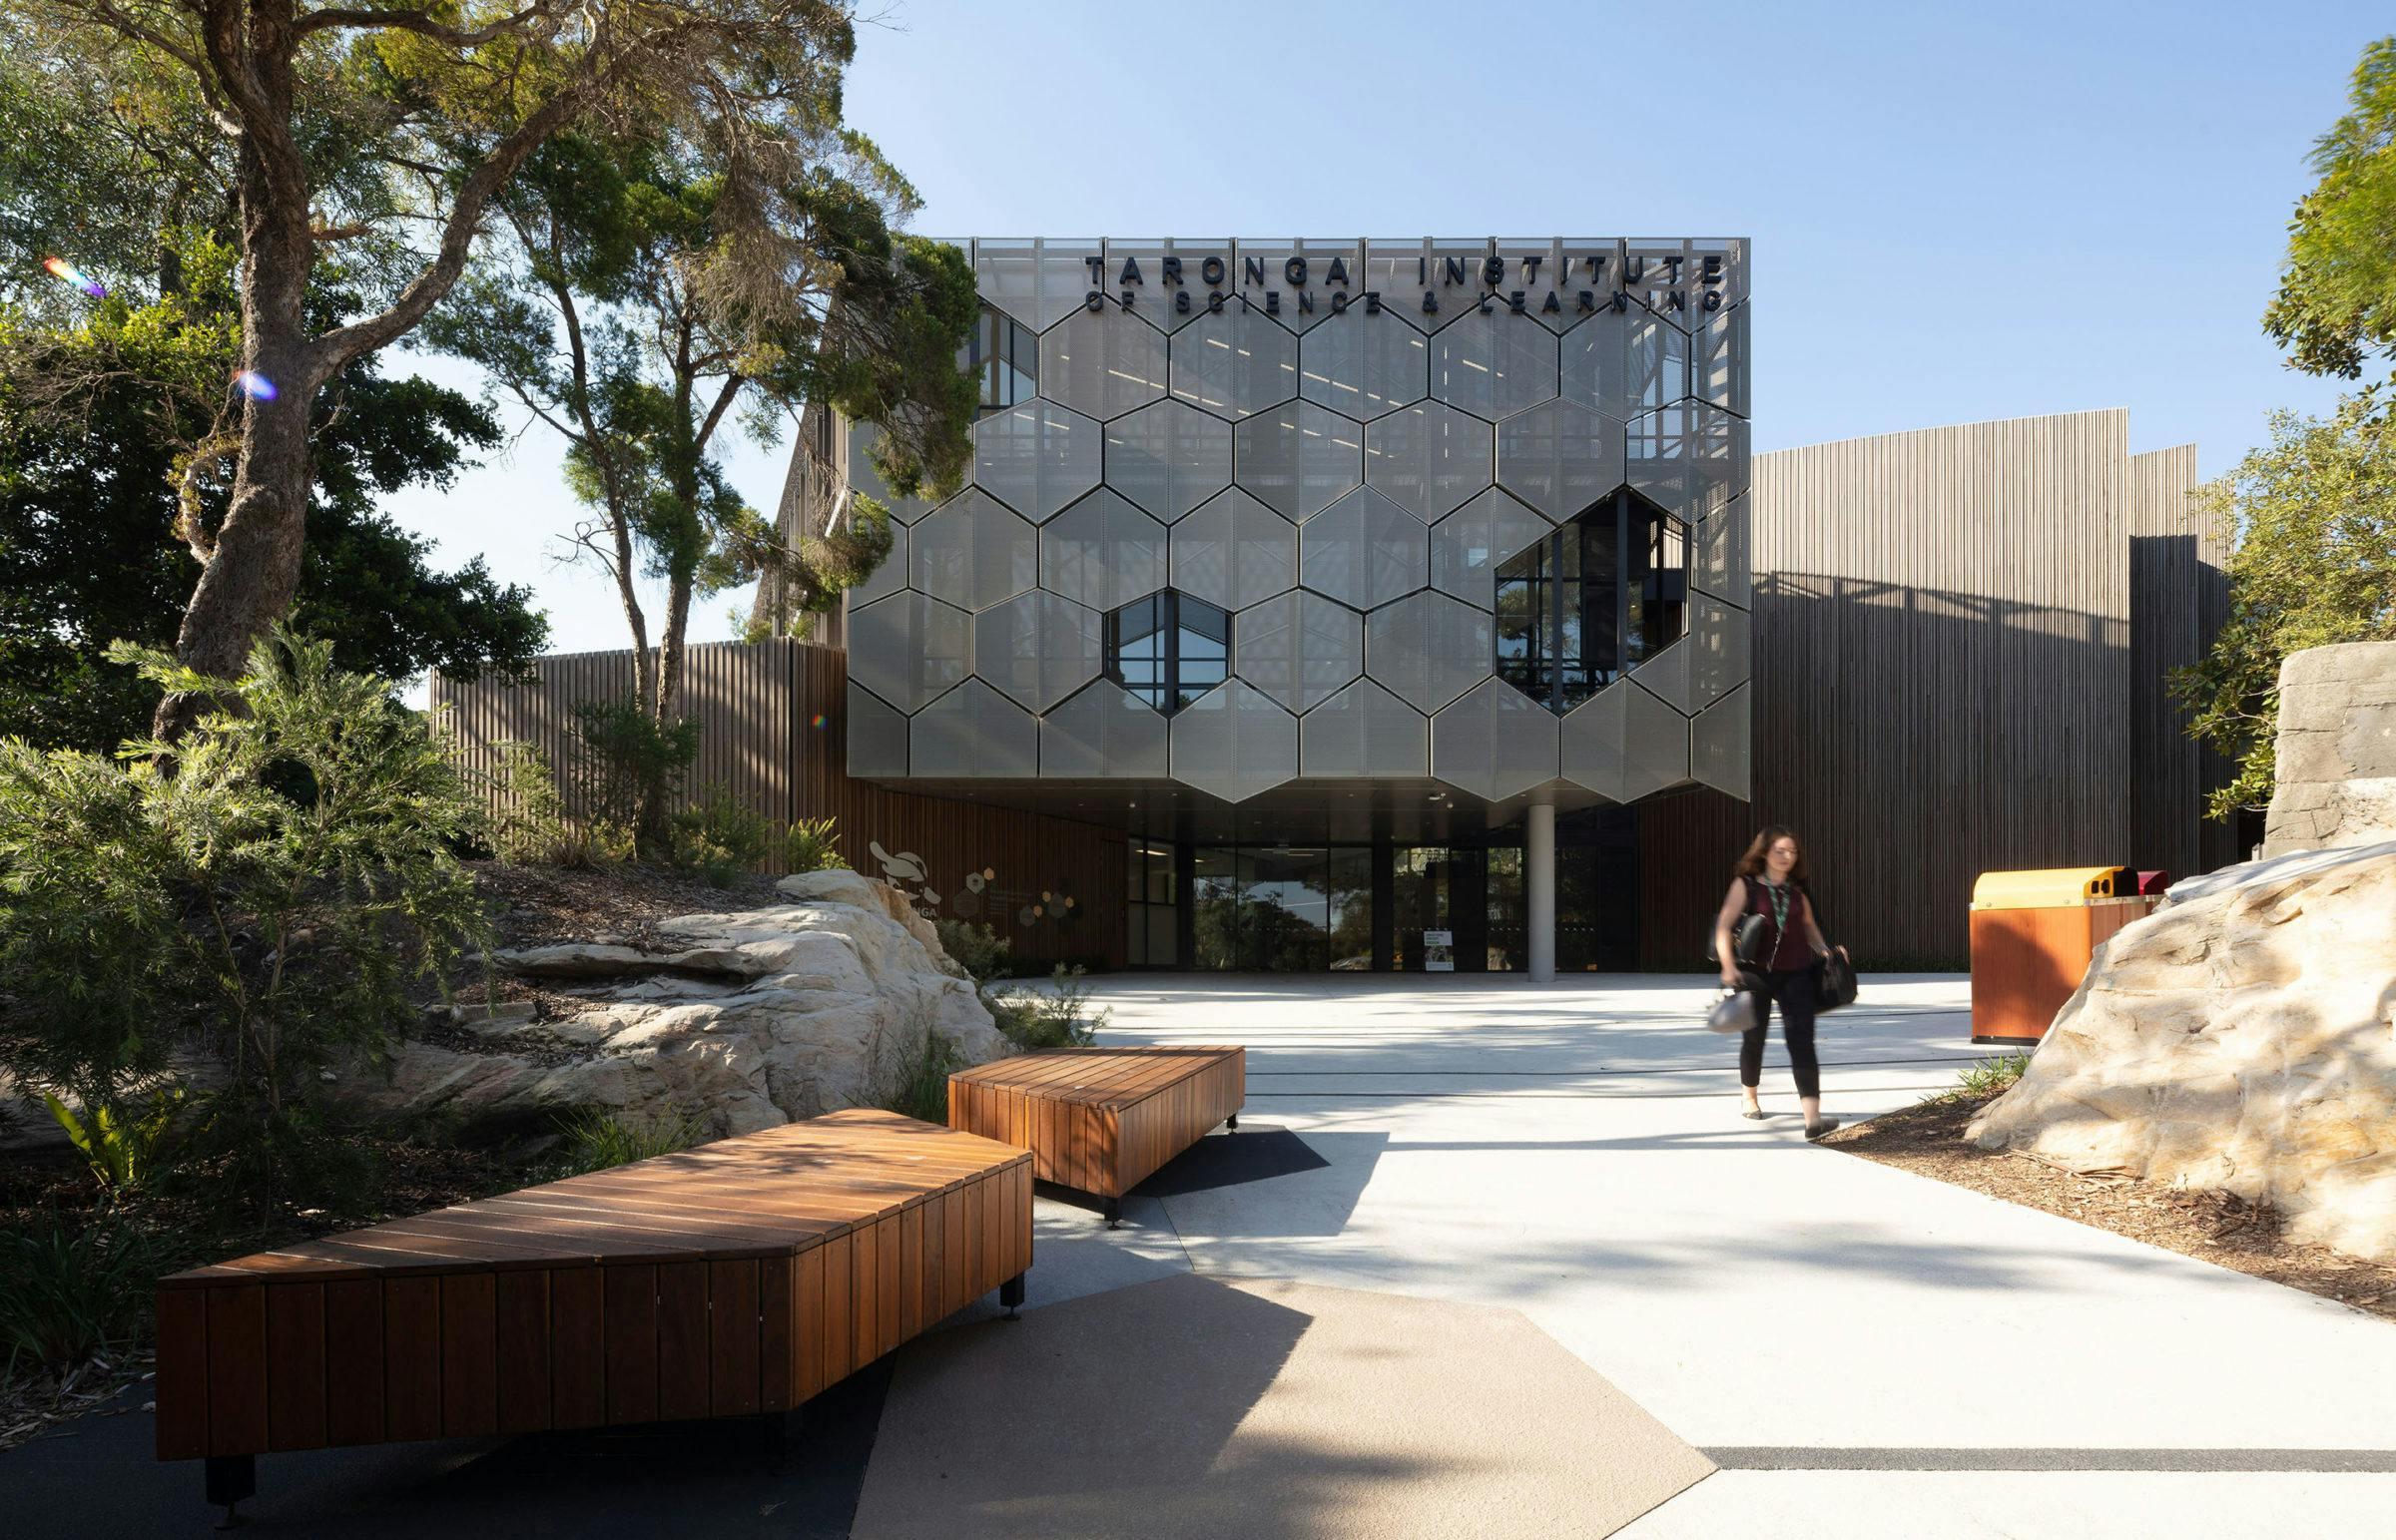 Taronga Institute of Science and Learning, Mosman, 2019.